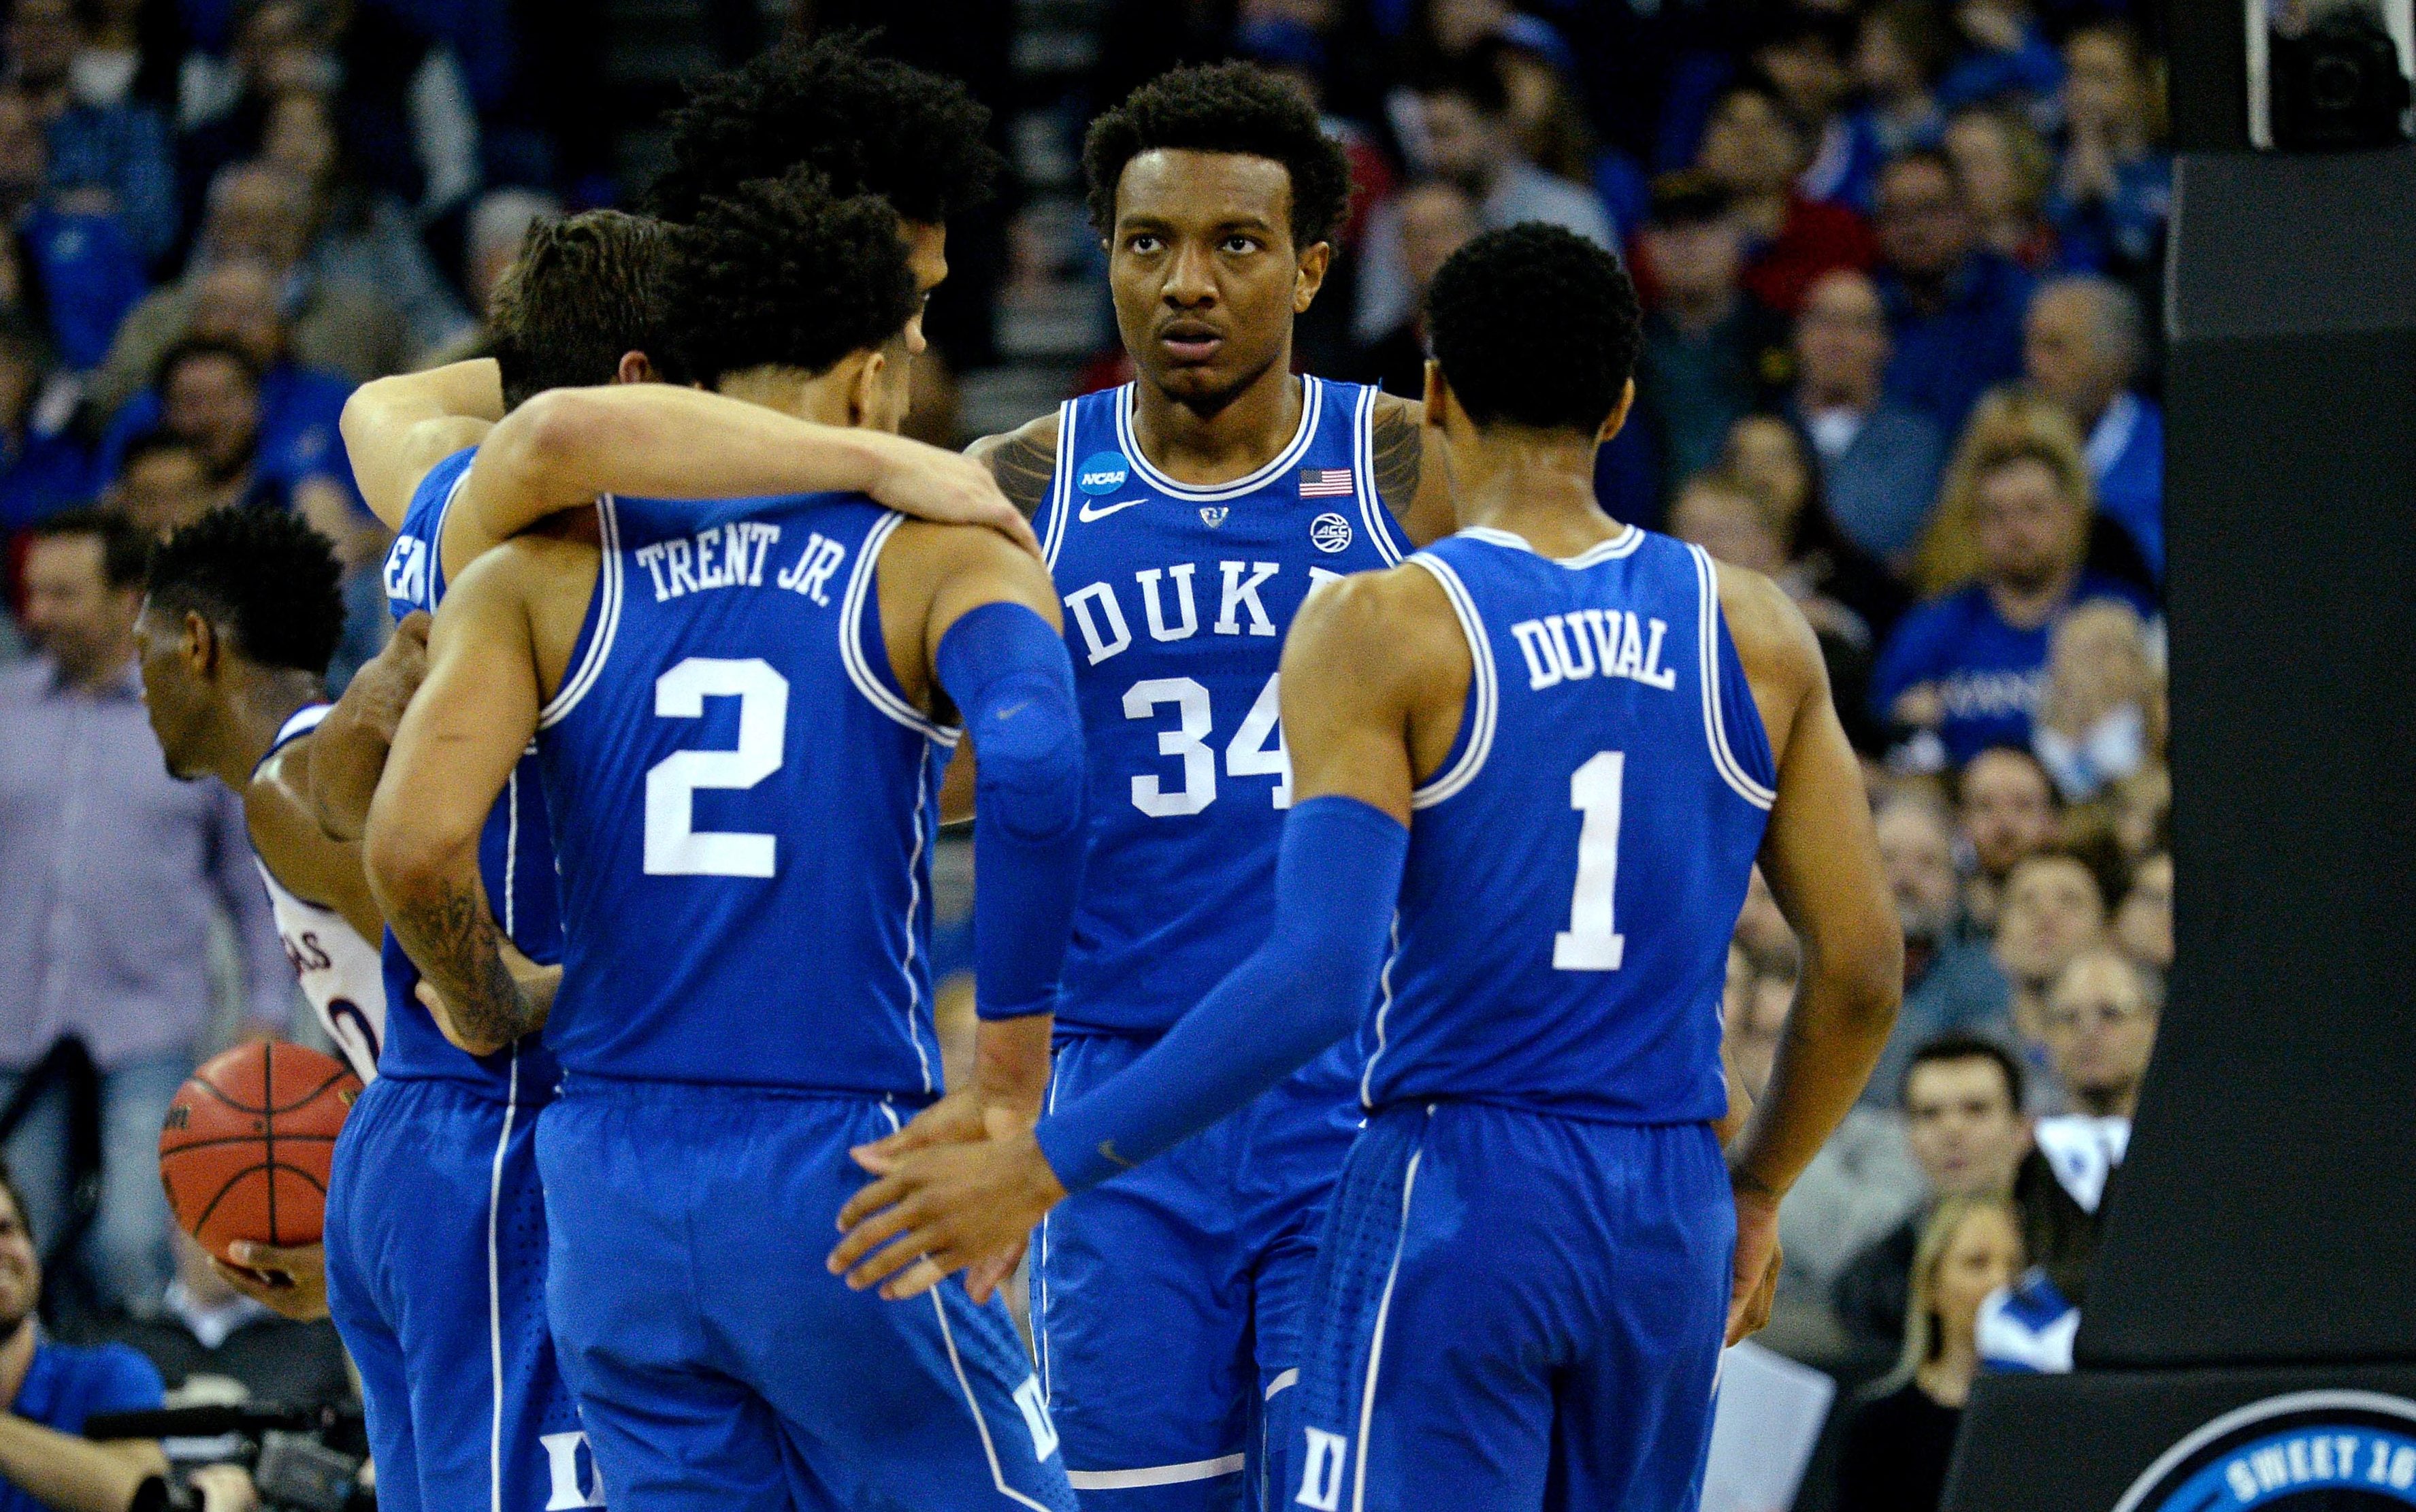 Wendell Carter says Duke players will show more in NBA than in